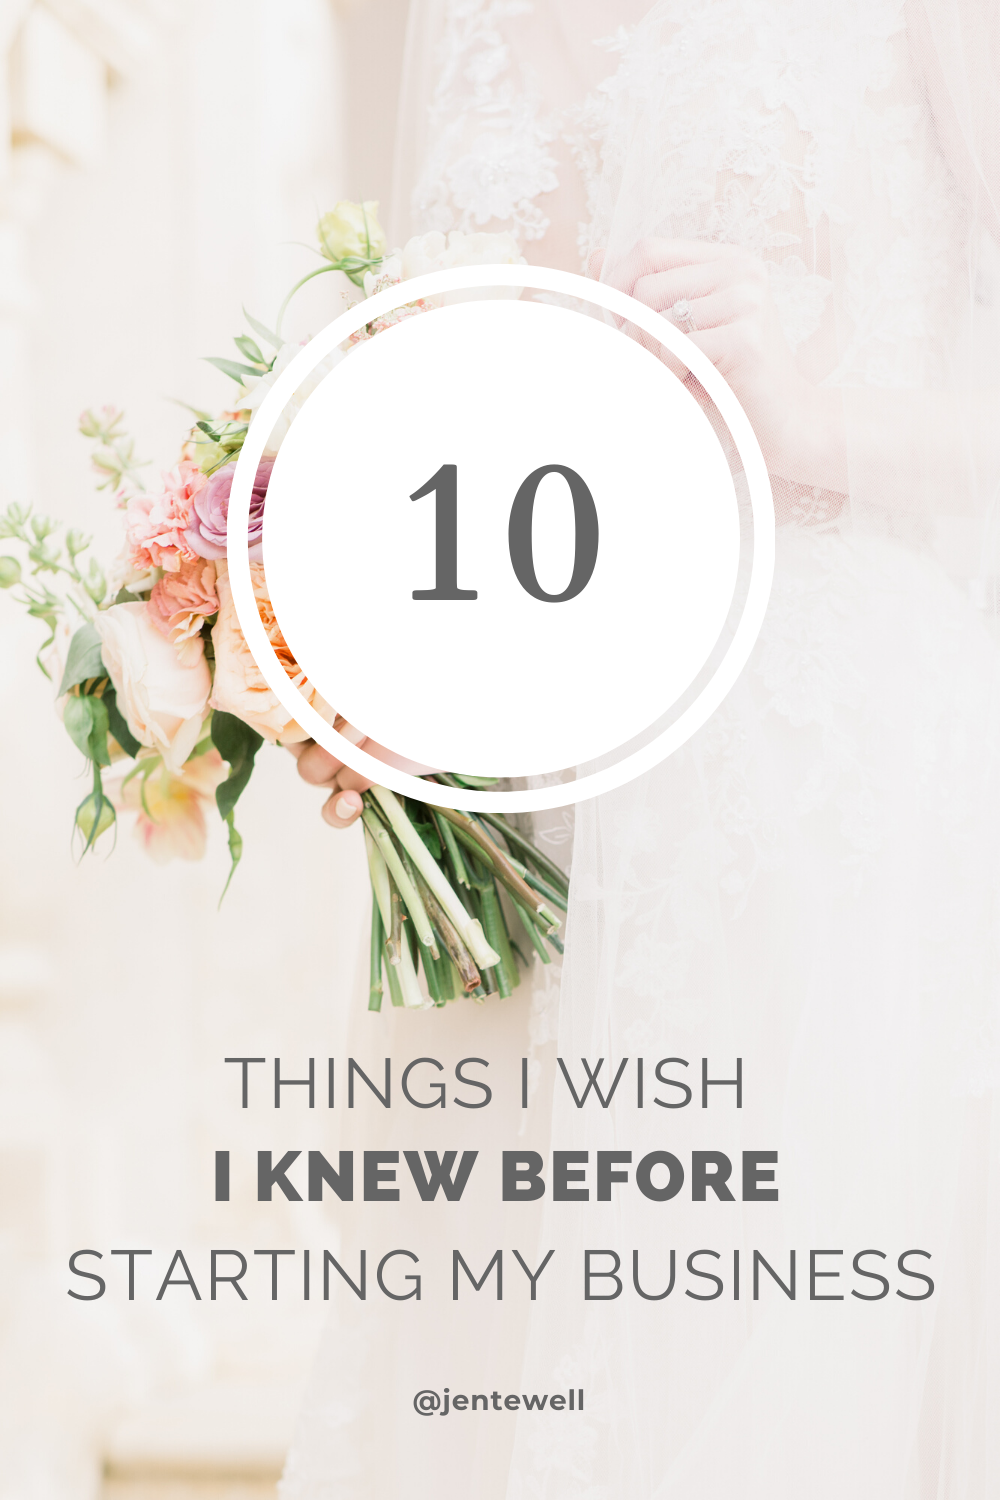 10 Things I wish I knew before starting my business